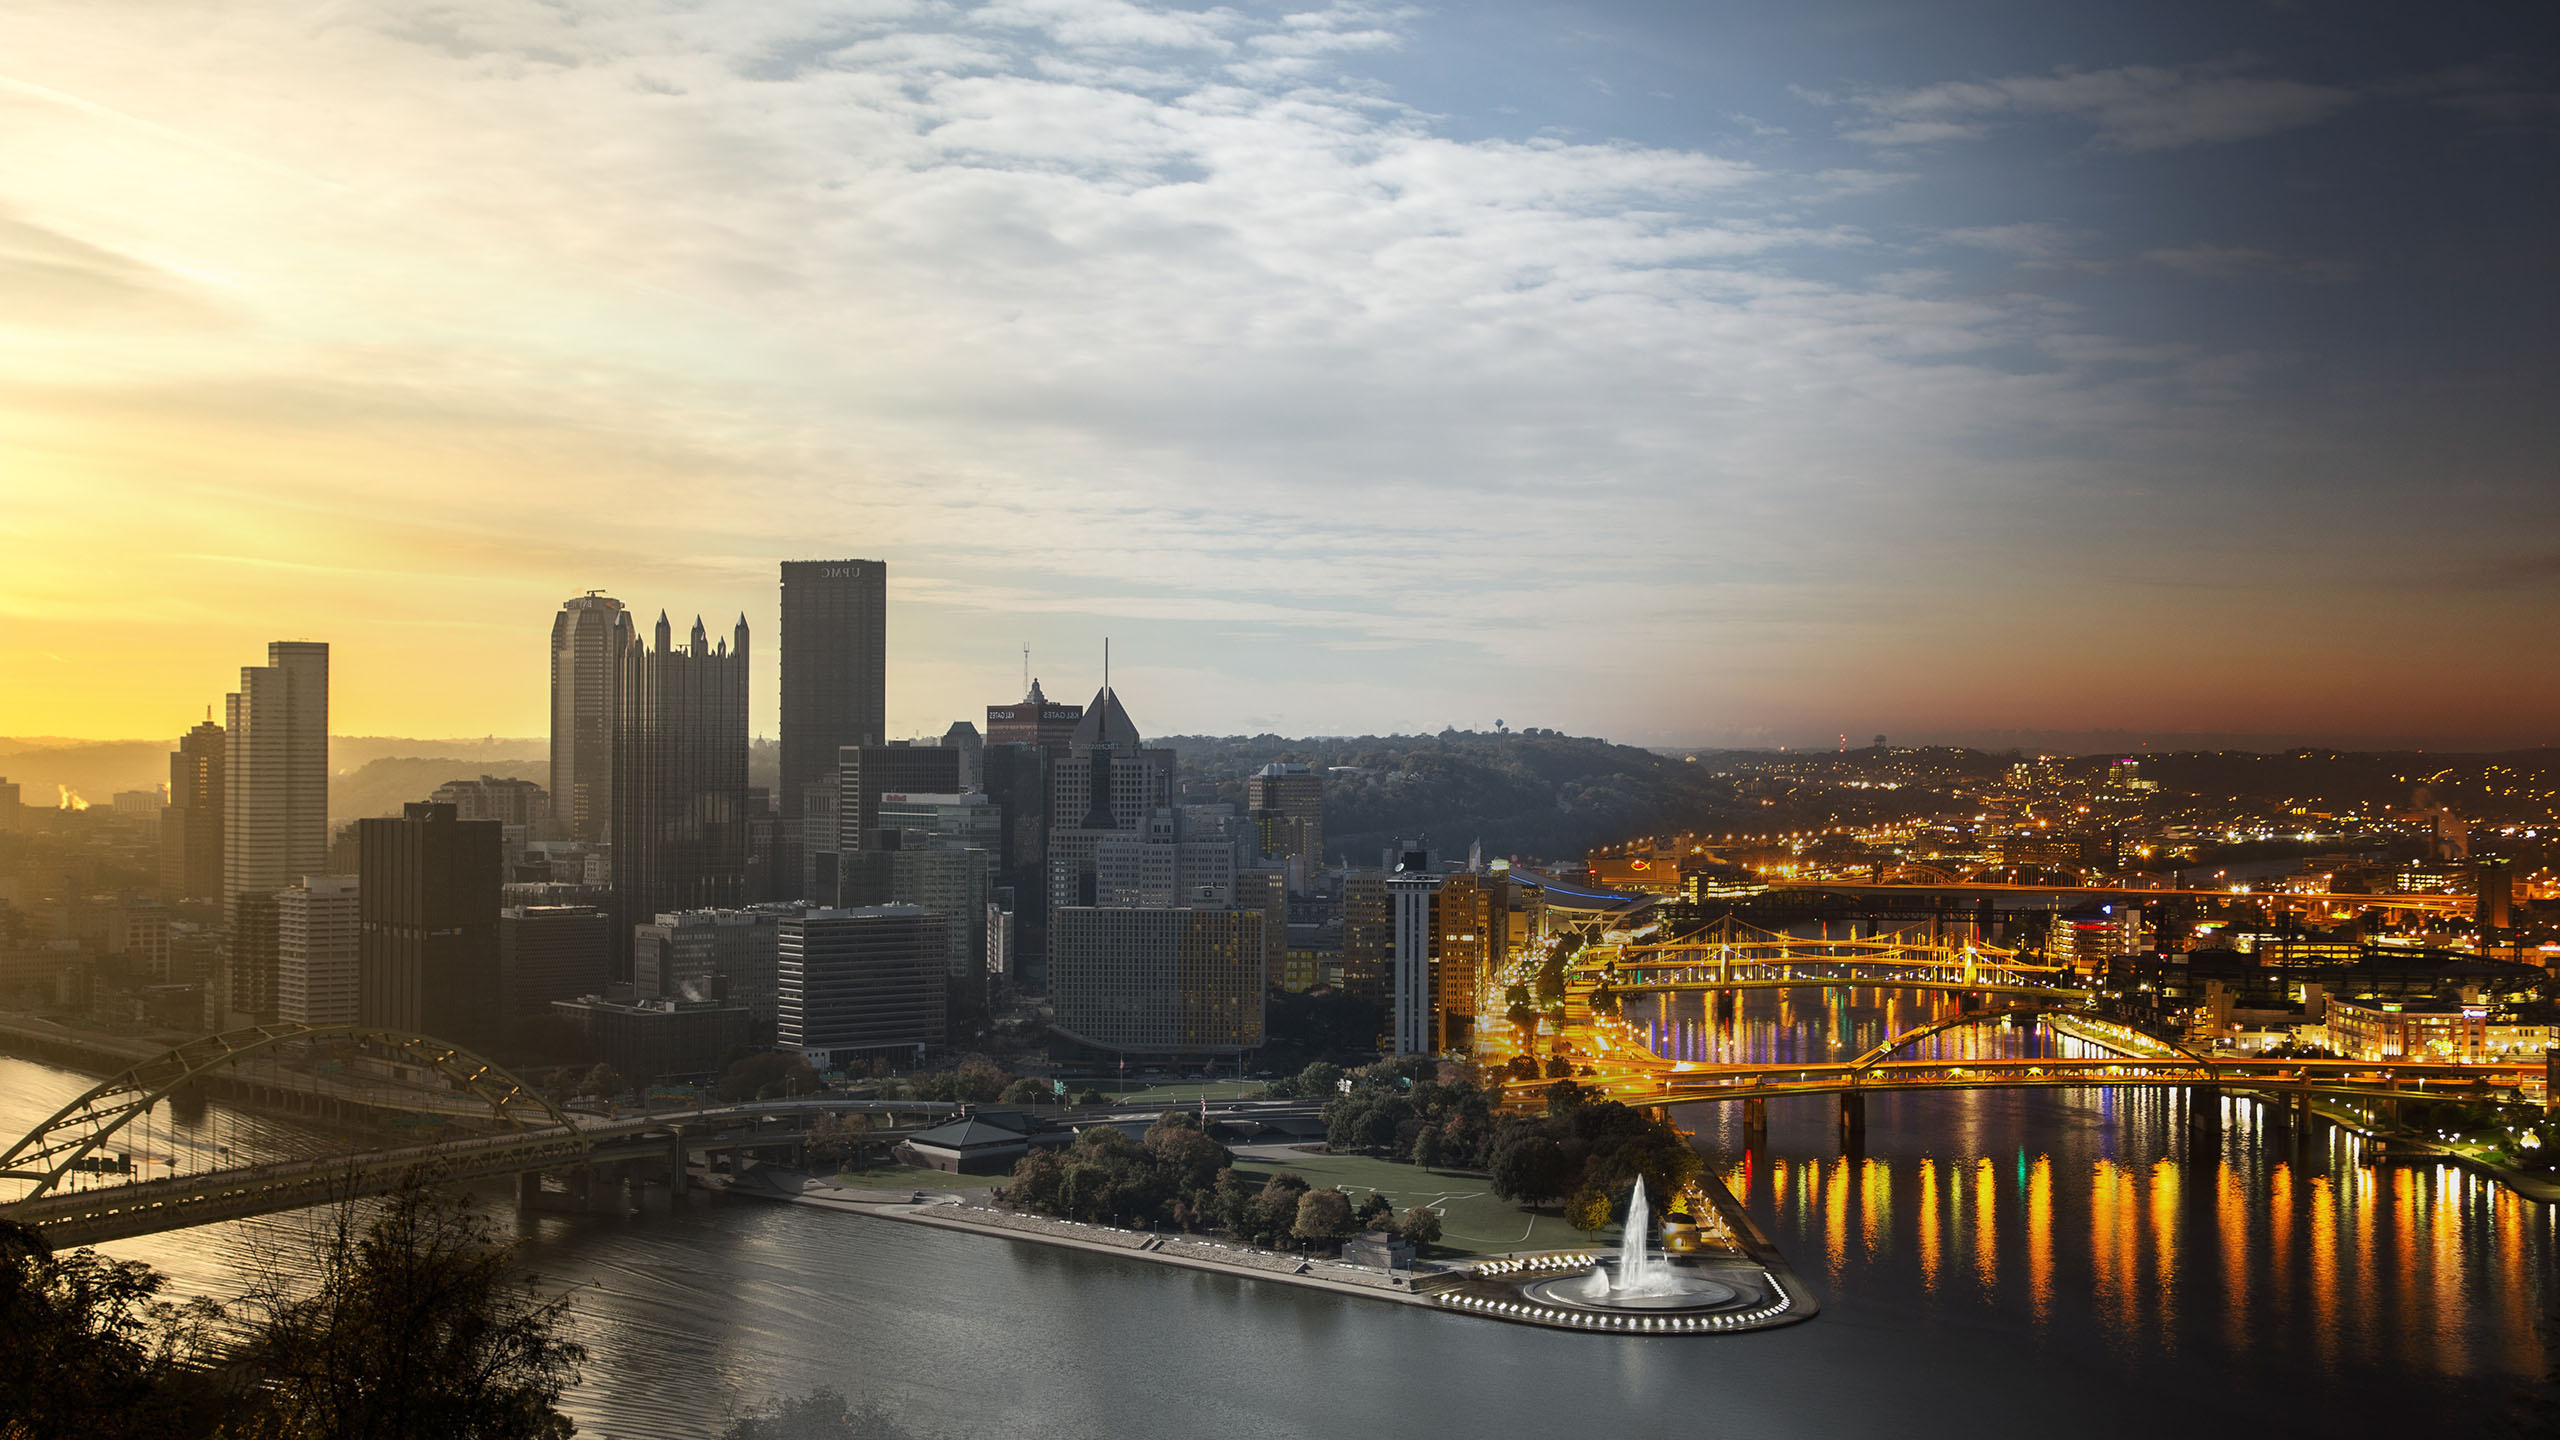 Pittsburgh skyline, Live wallpapers for Android and Windows, 2560x1440 HD Desktop